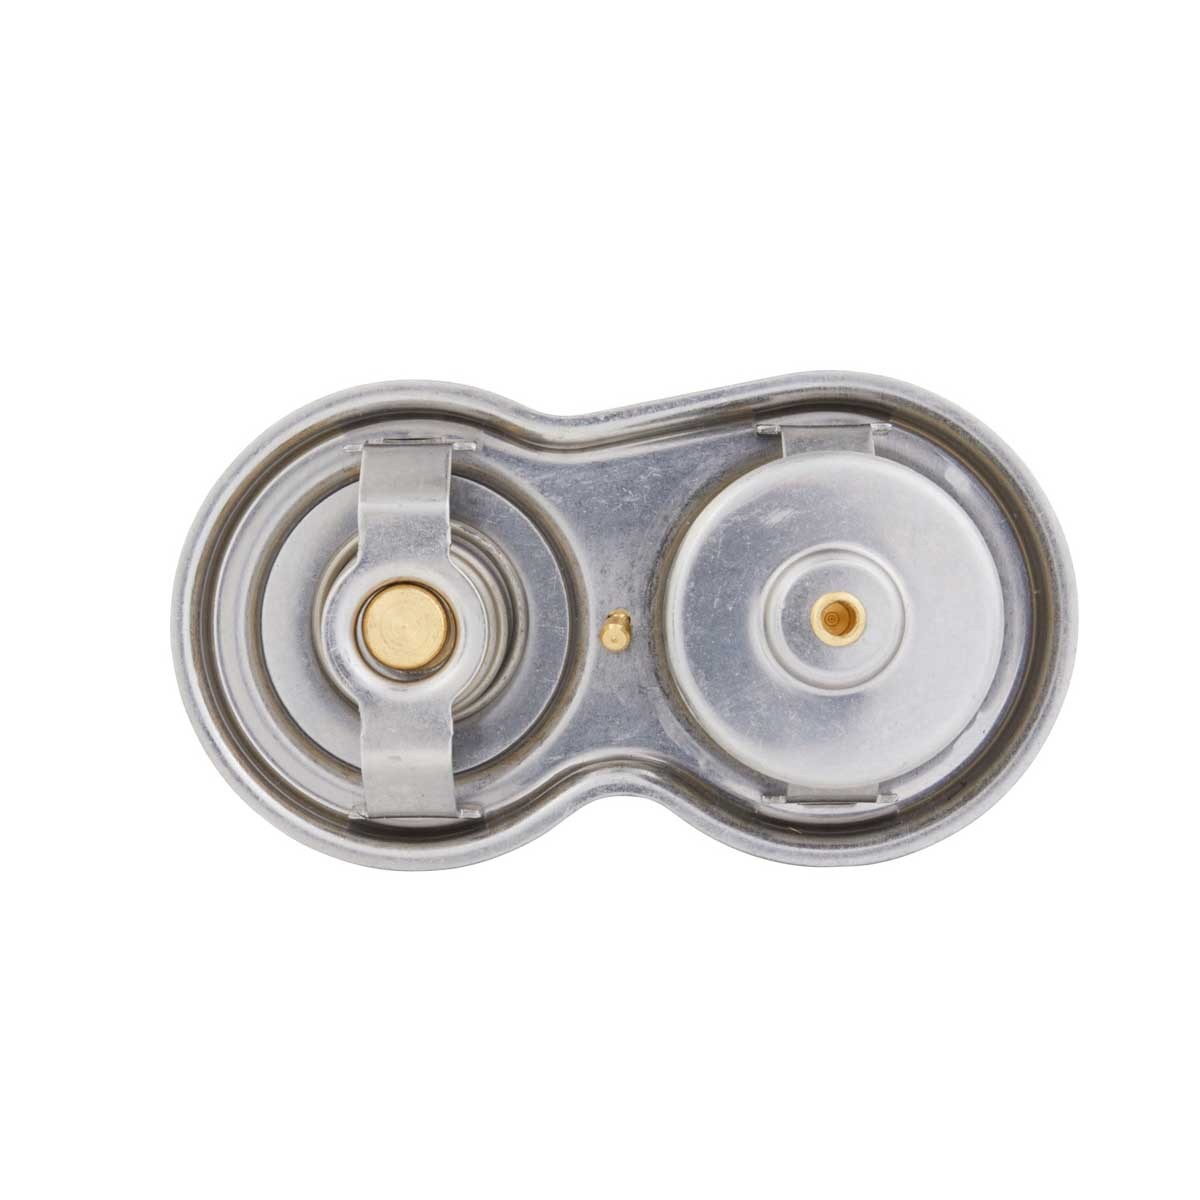 HELLA 8MT358083-071 Thermostat in engine cooling system Opening Temperature: 83,83°C, with gaskets/seals